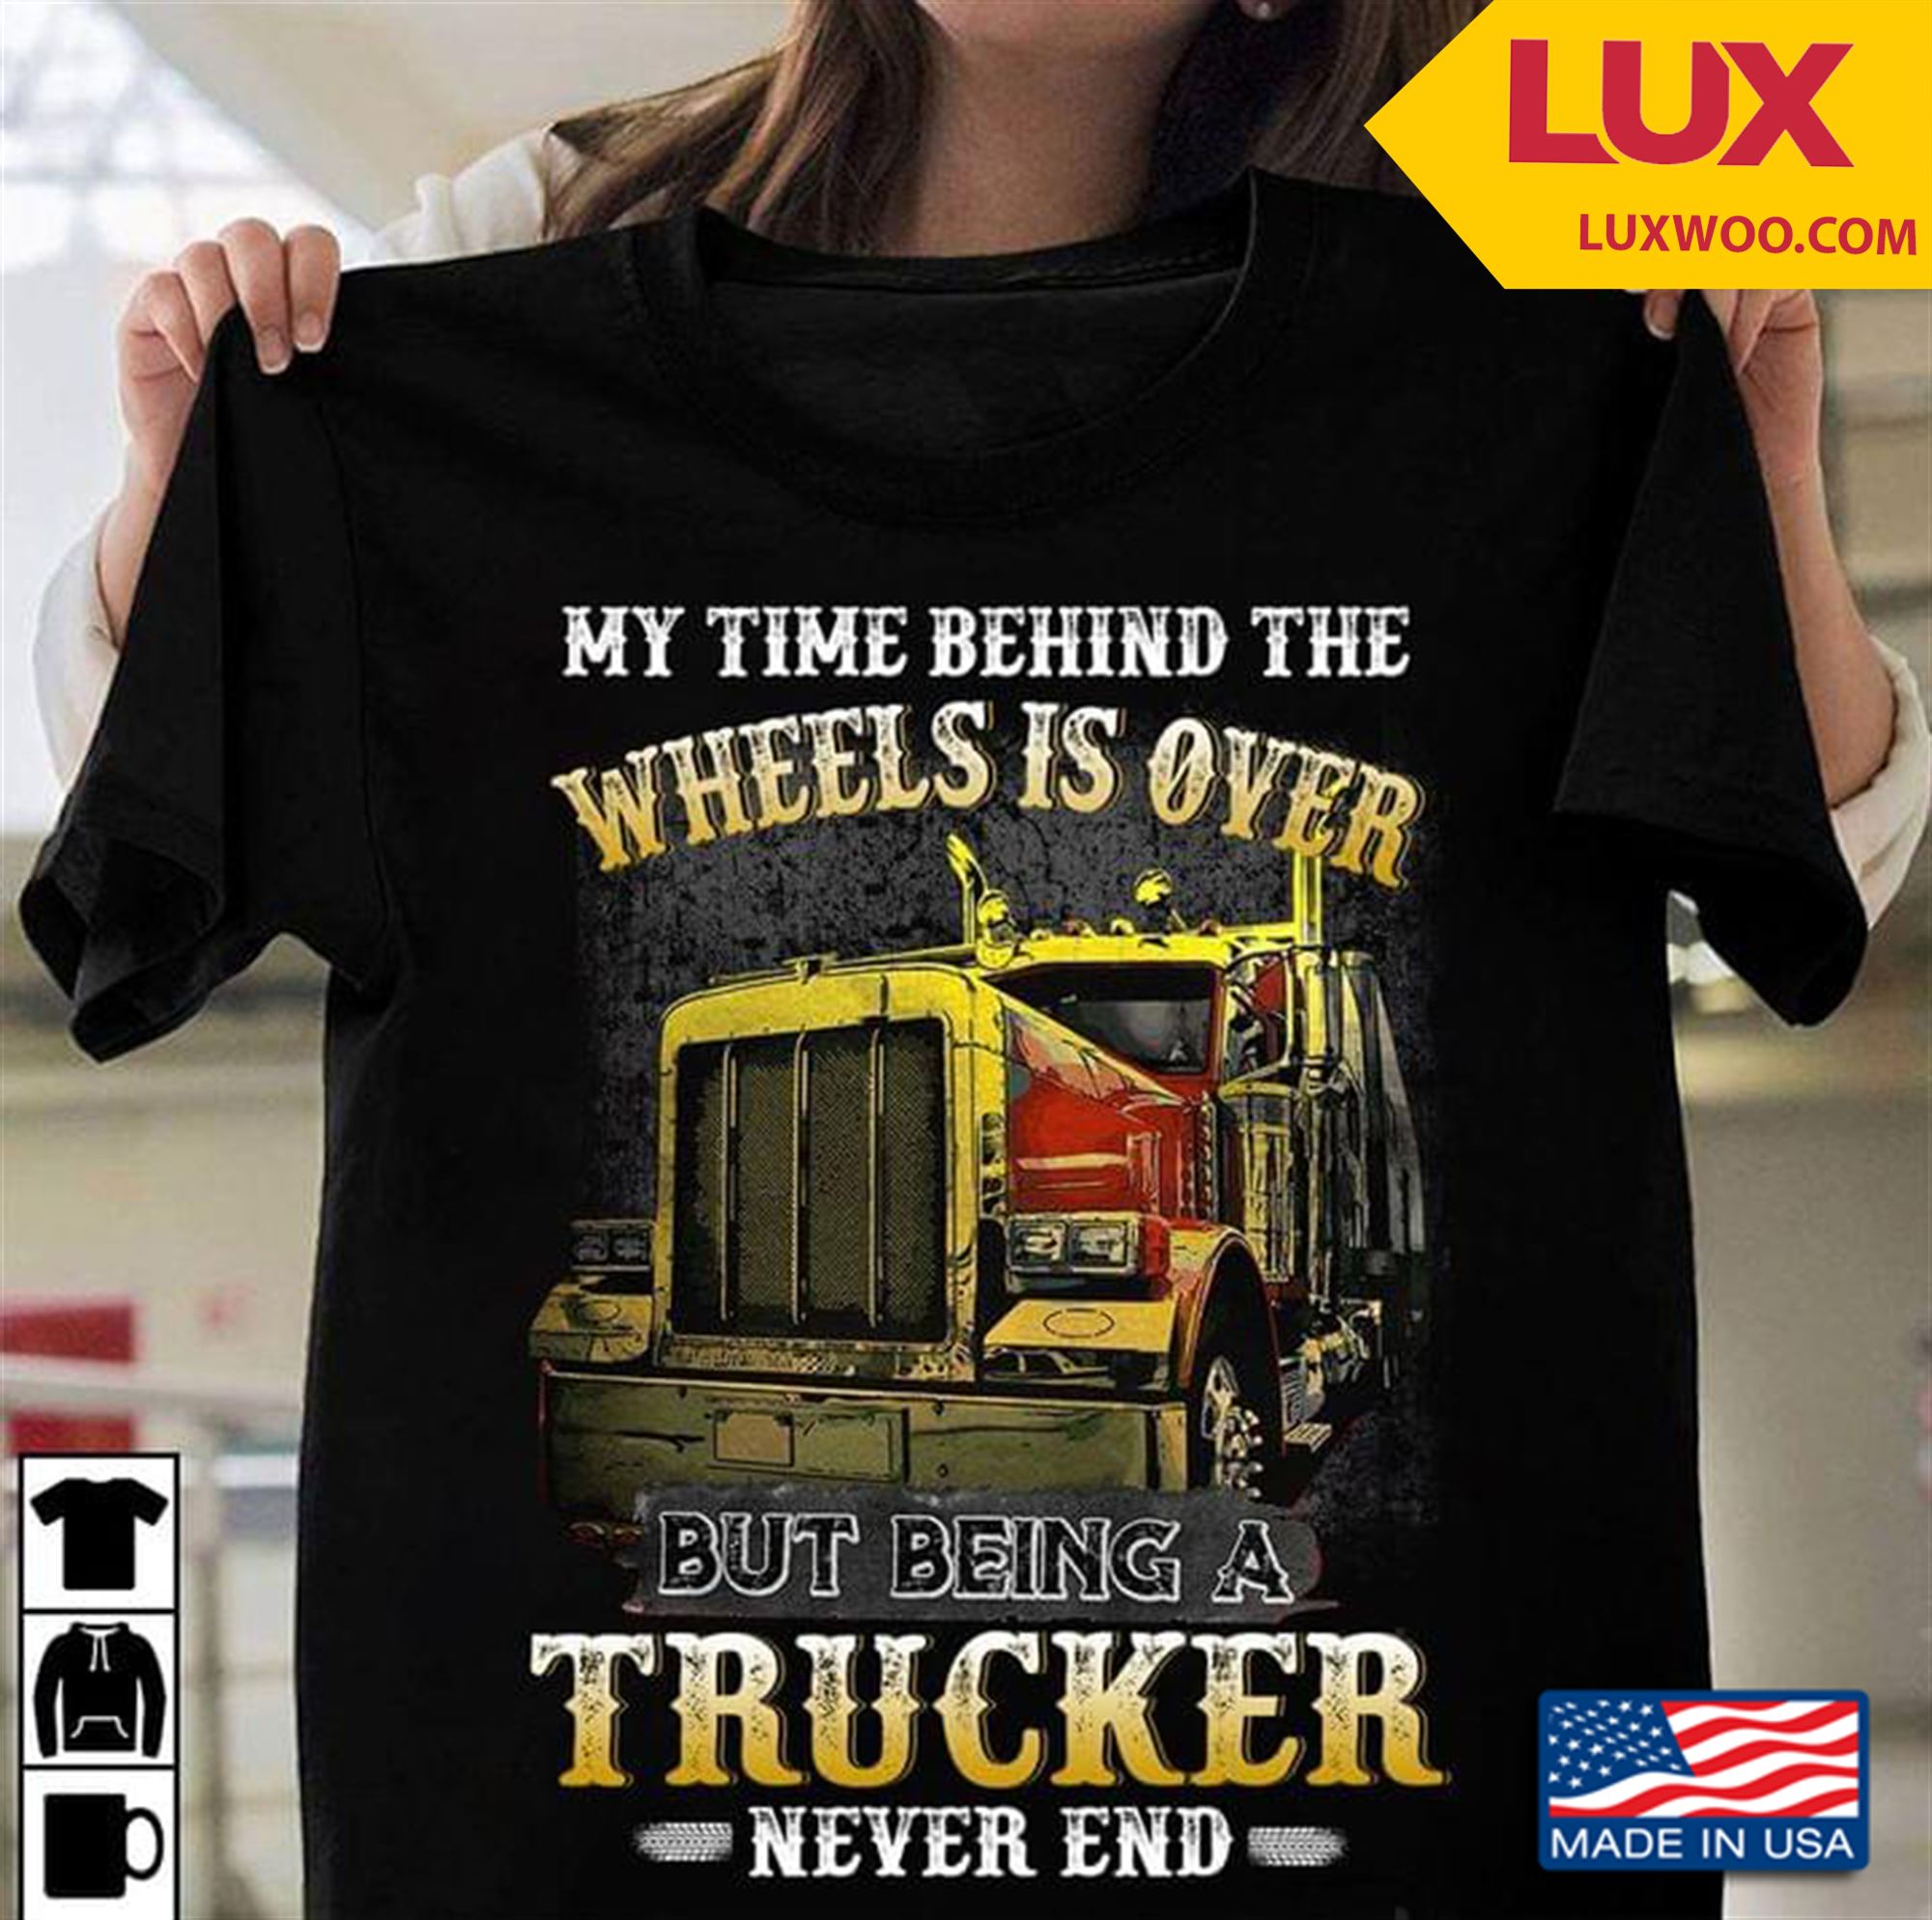 My Time Behind The Wheels Is Over But Being A Trucker Never End Tshirt Size Up To 5xl